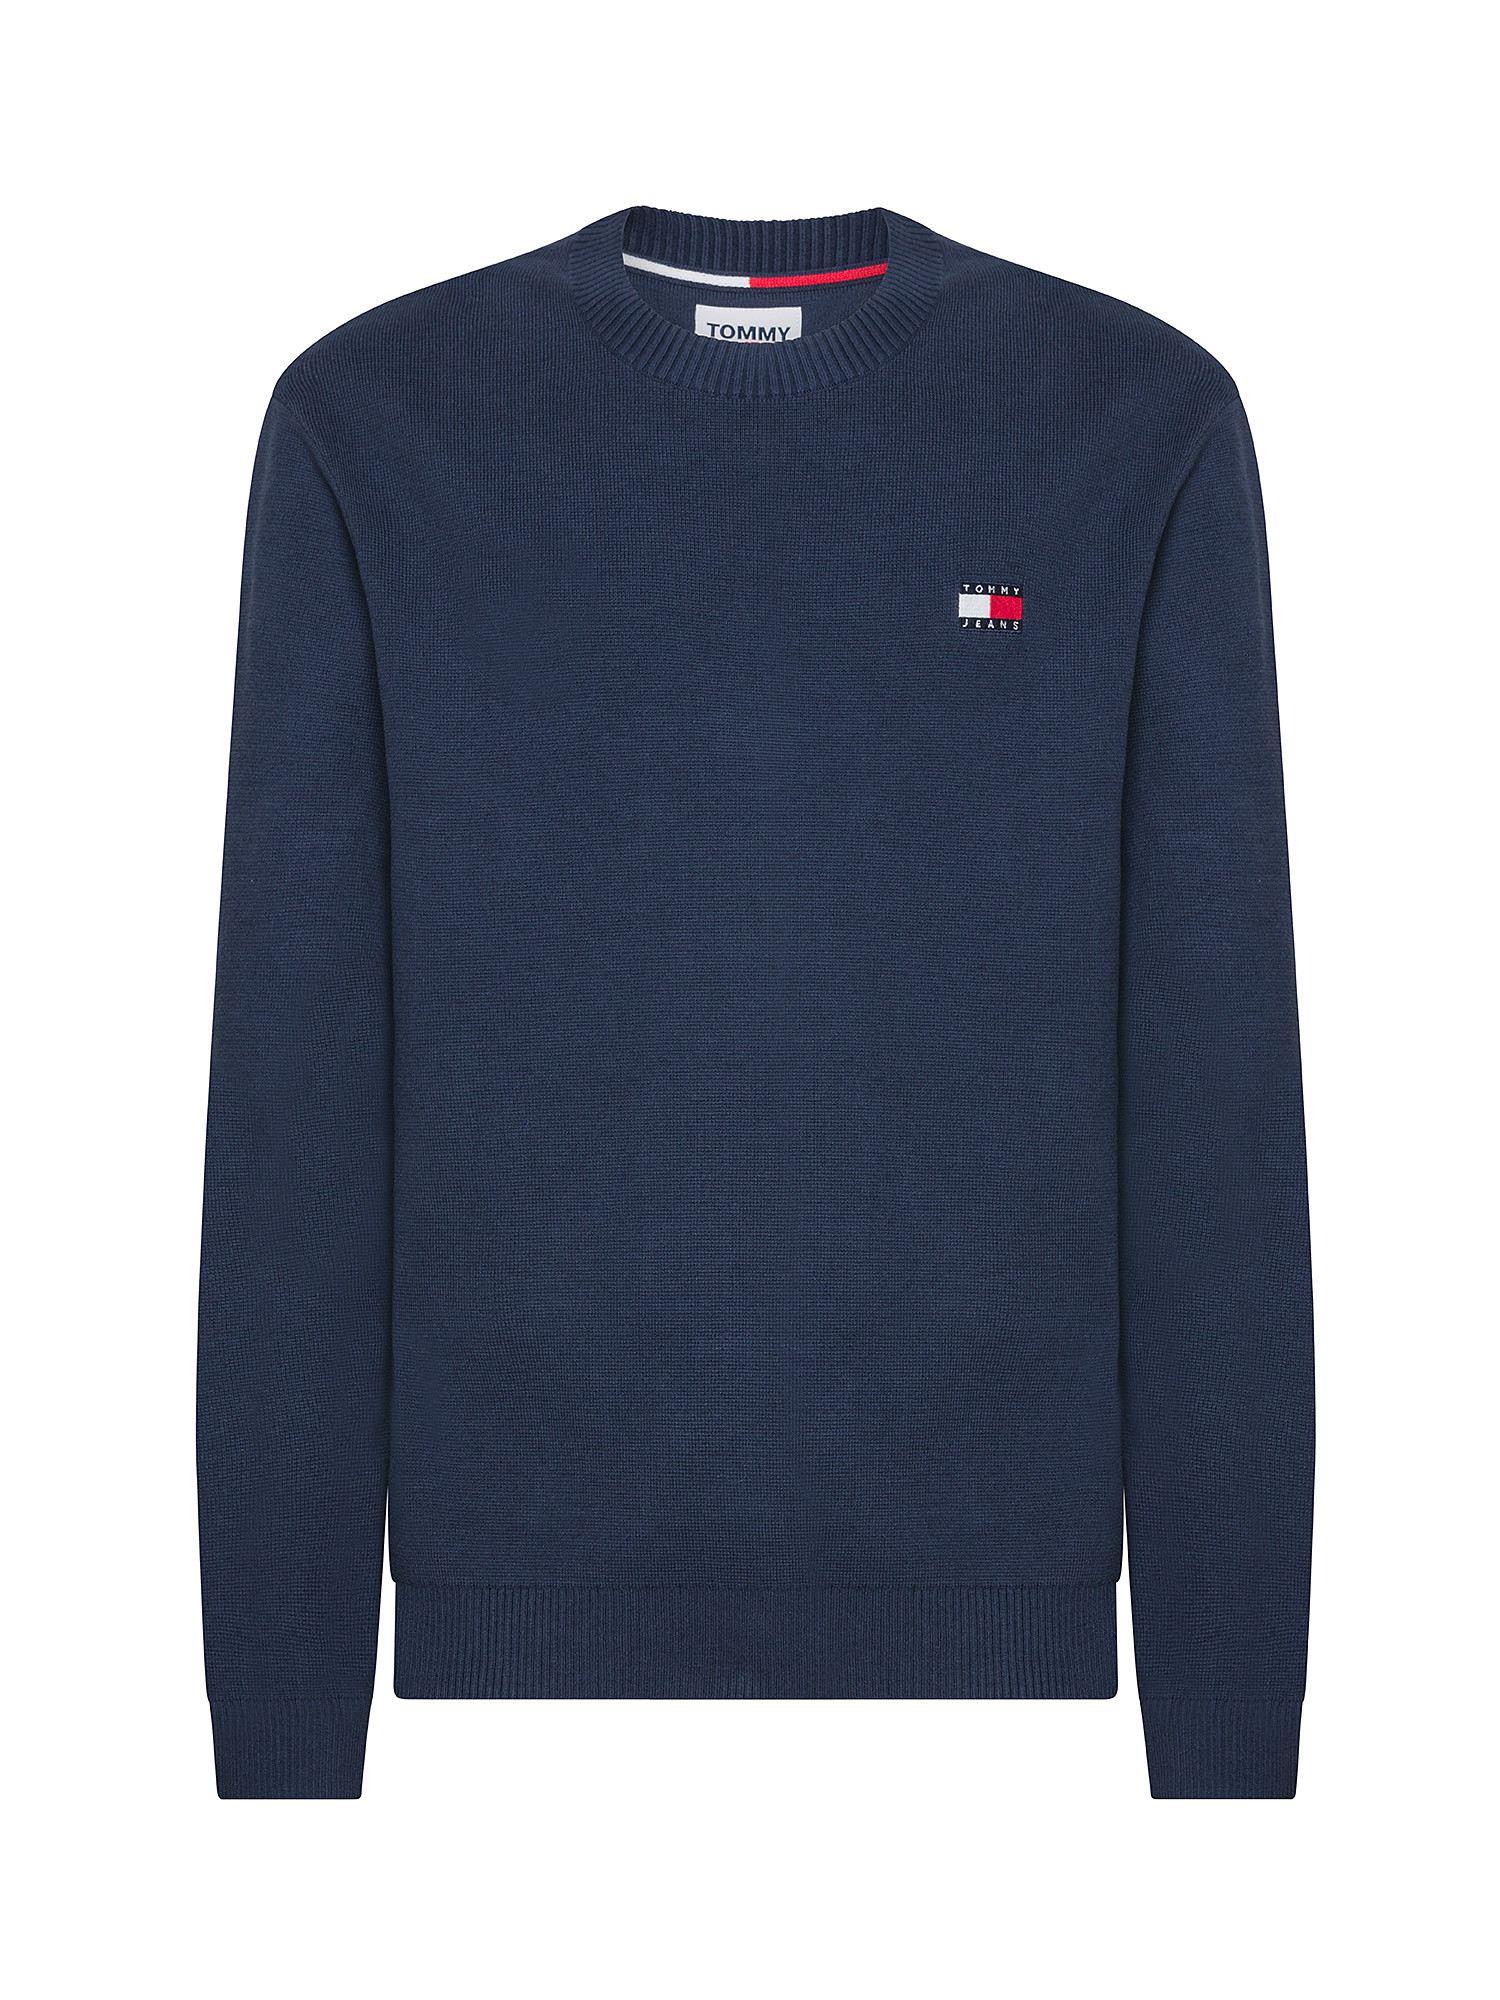 Tommy Jeans - Cotton sweater with embroidered micrologo, Blue, large image number 0